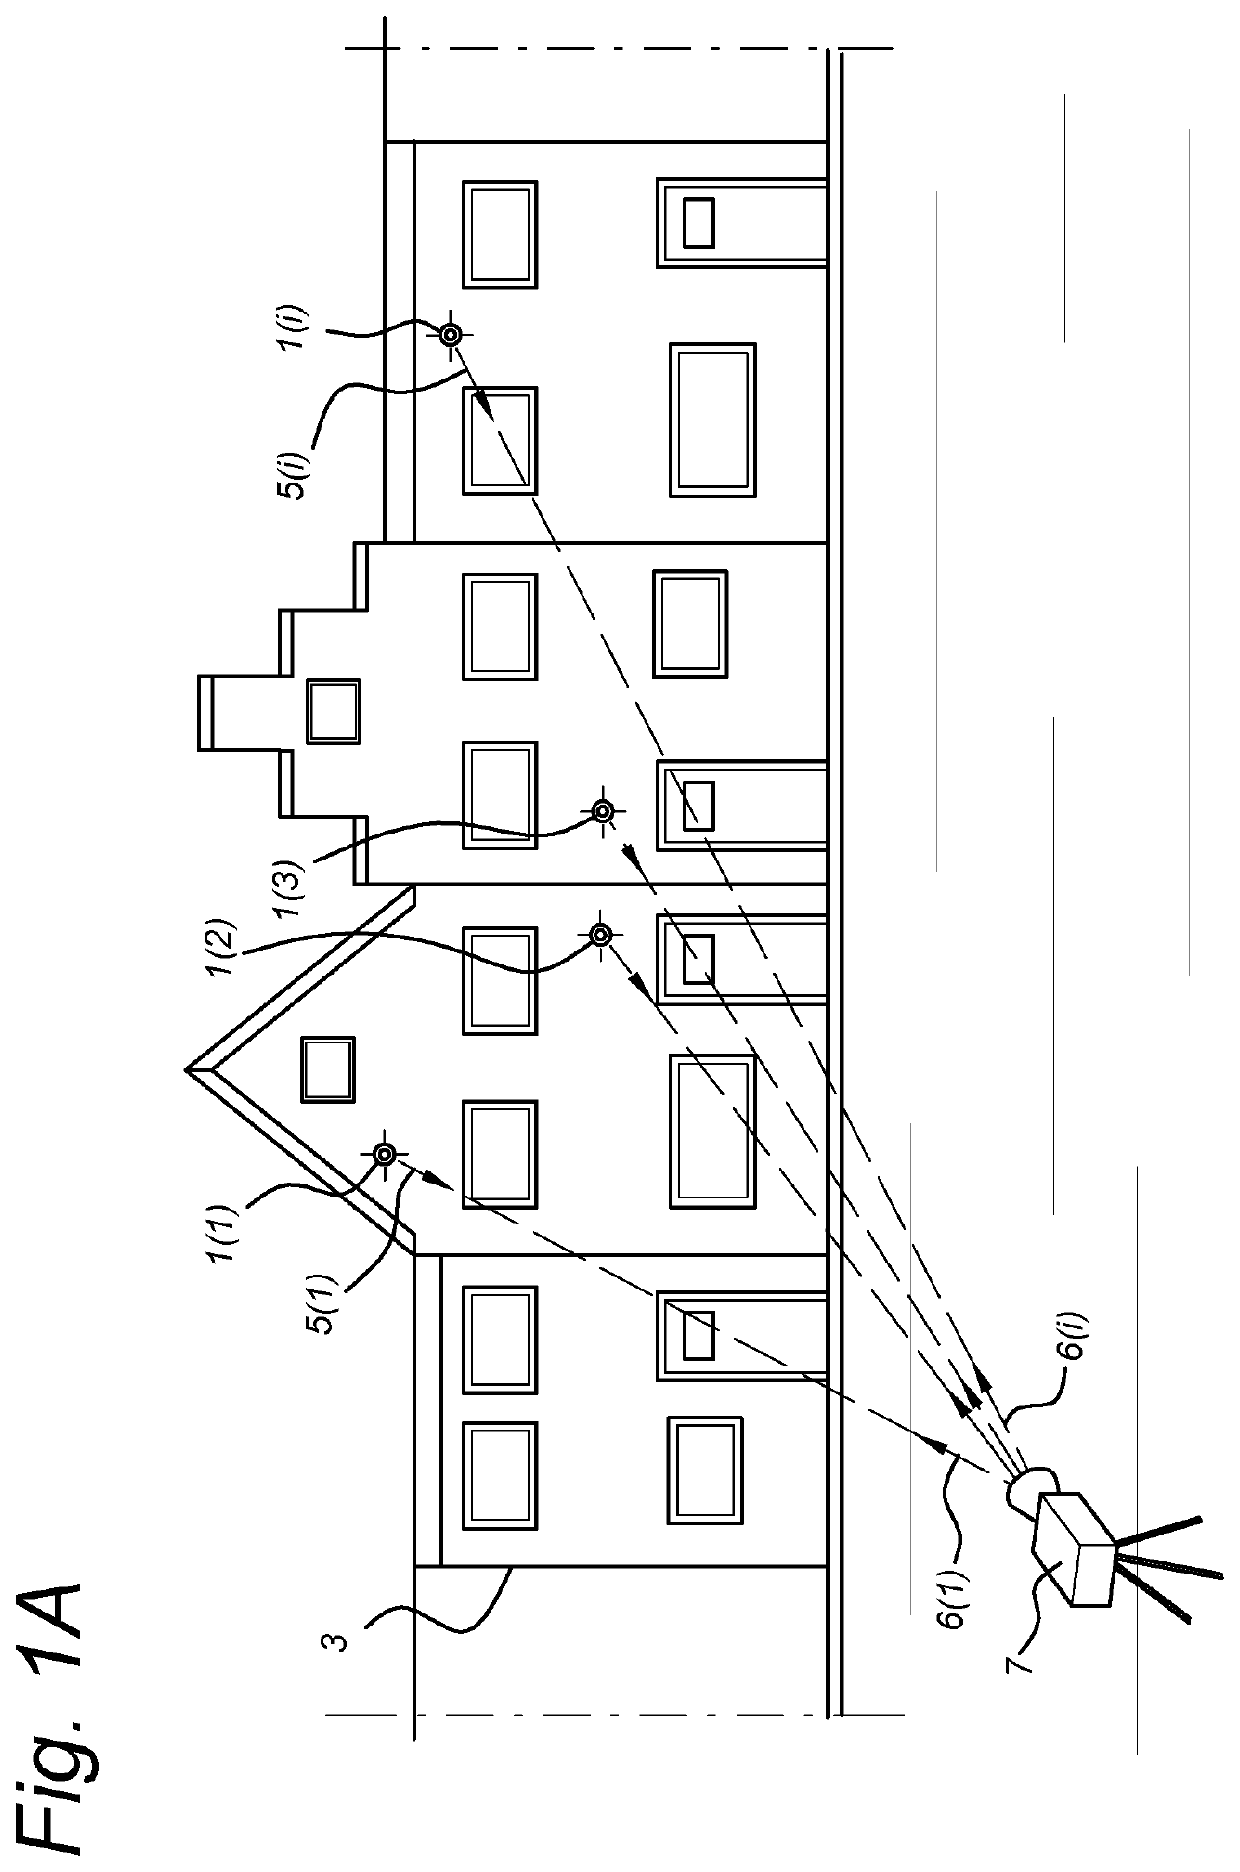 Method of and apparatus for monitoring positions on an object